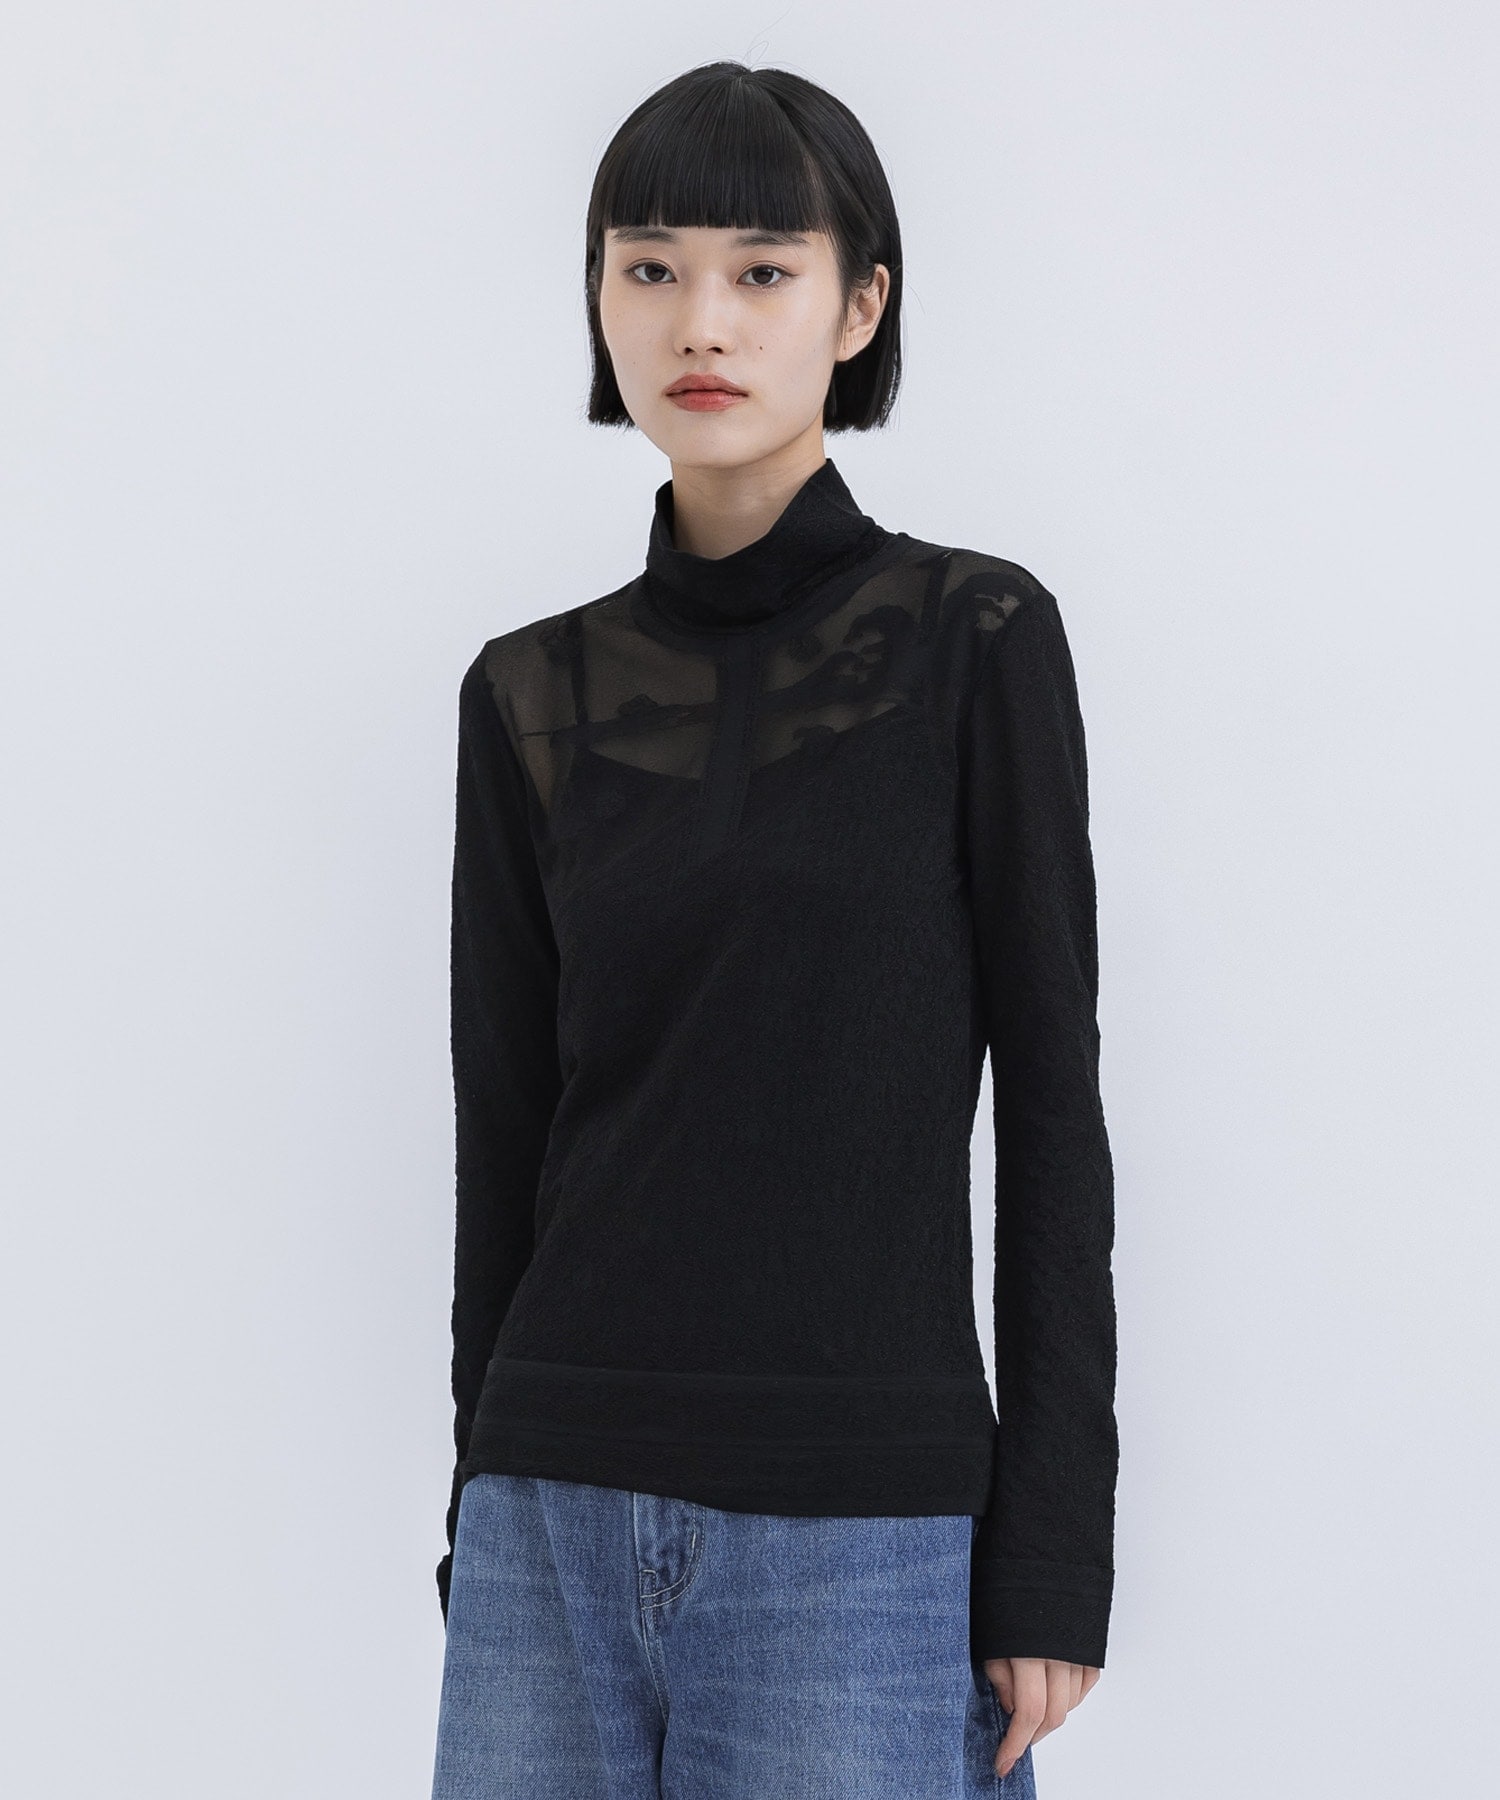 Landscape Graphic Sheer Knitted High Neck Top